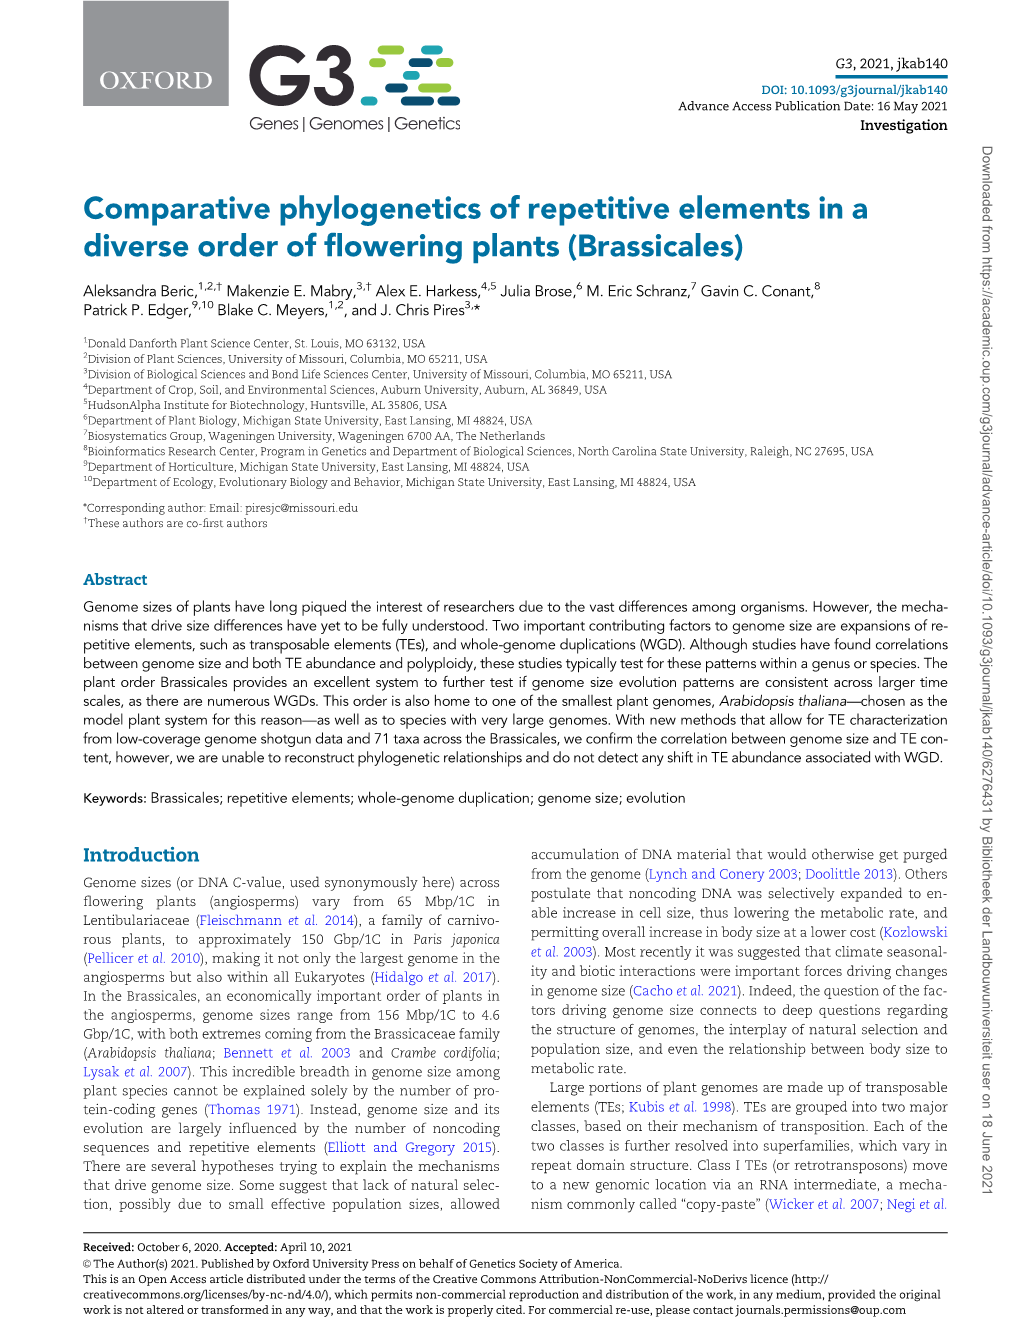 Comparative Phylogenetics of Repetitive Elements in a Diverse Order of Flowering Plants (Brassicales)